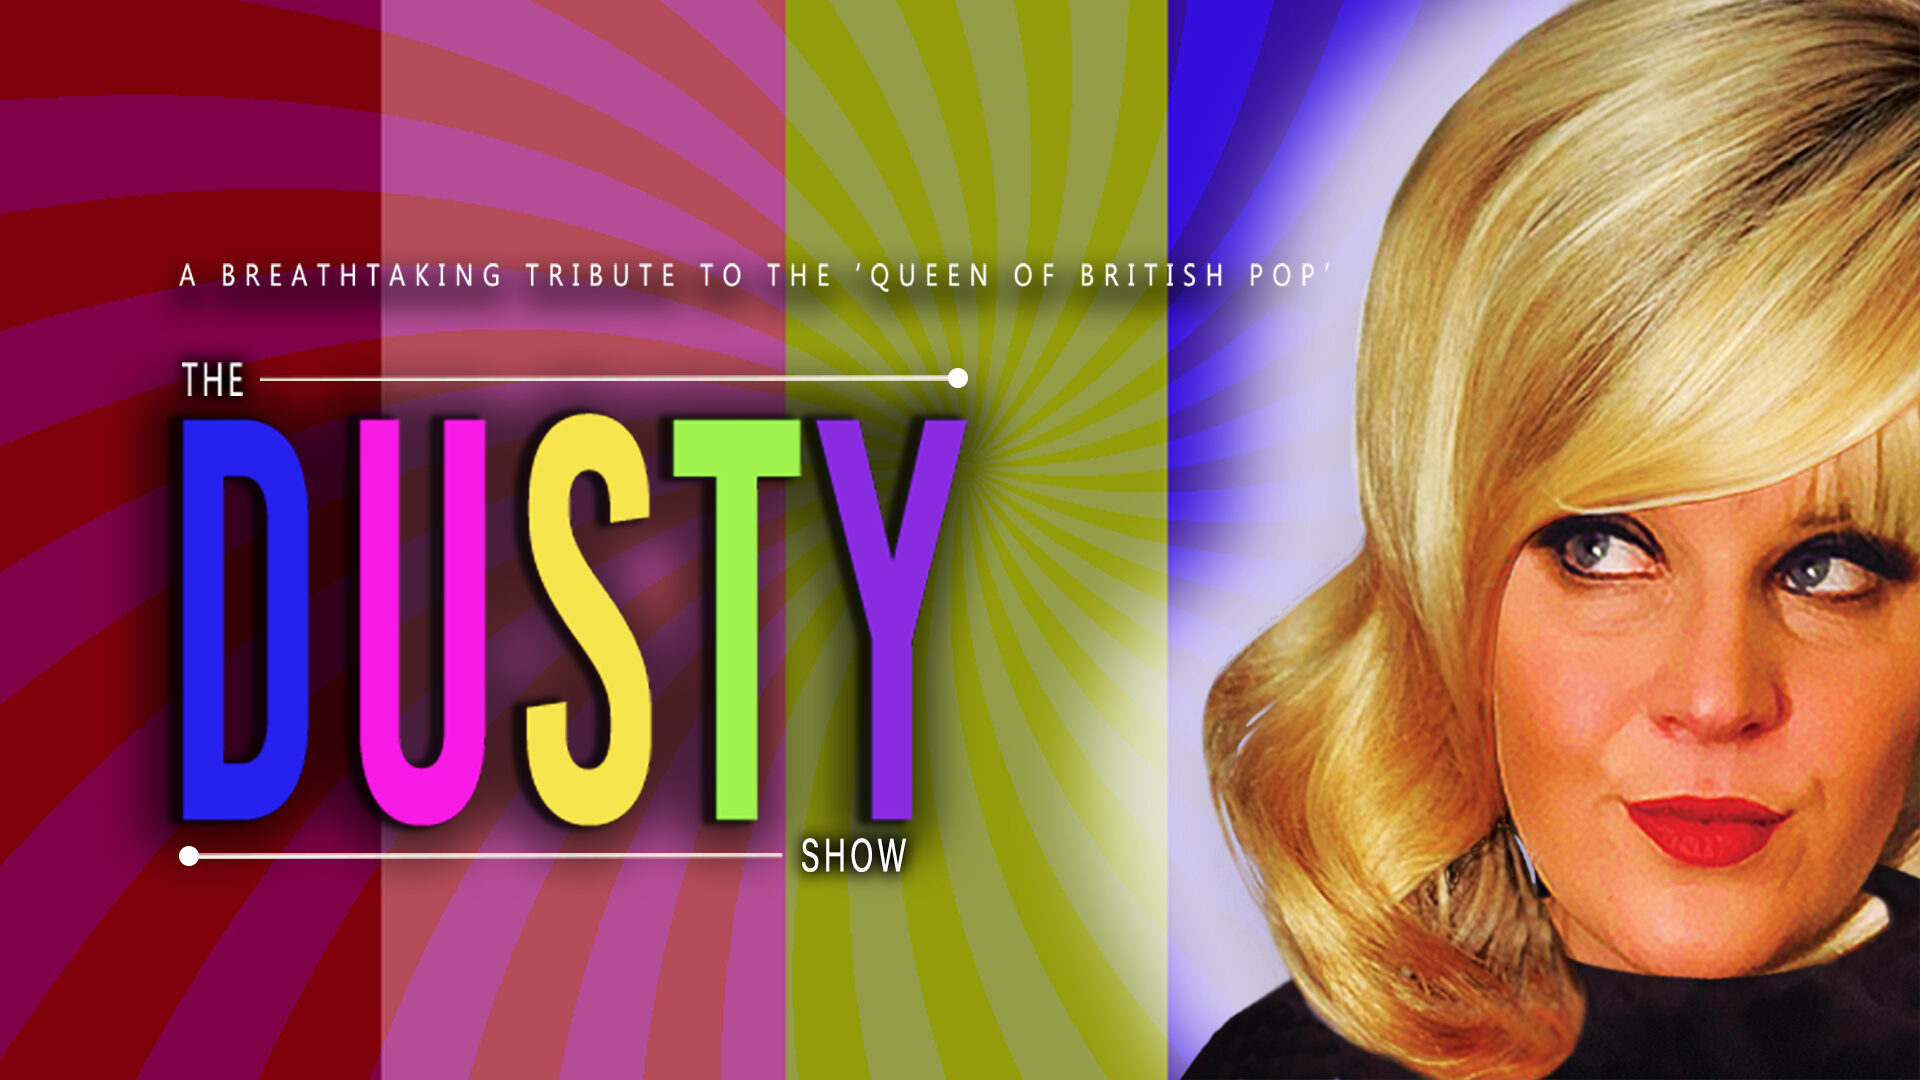 The Dusty Show